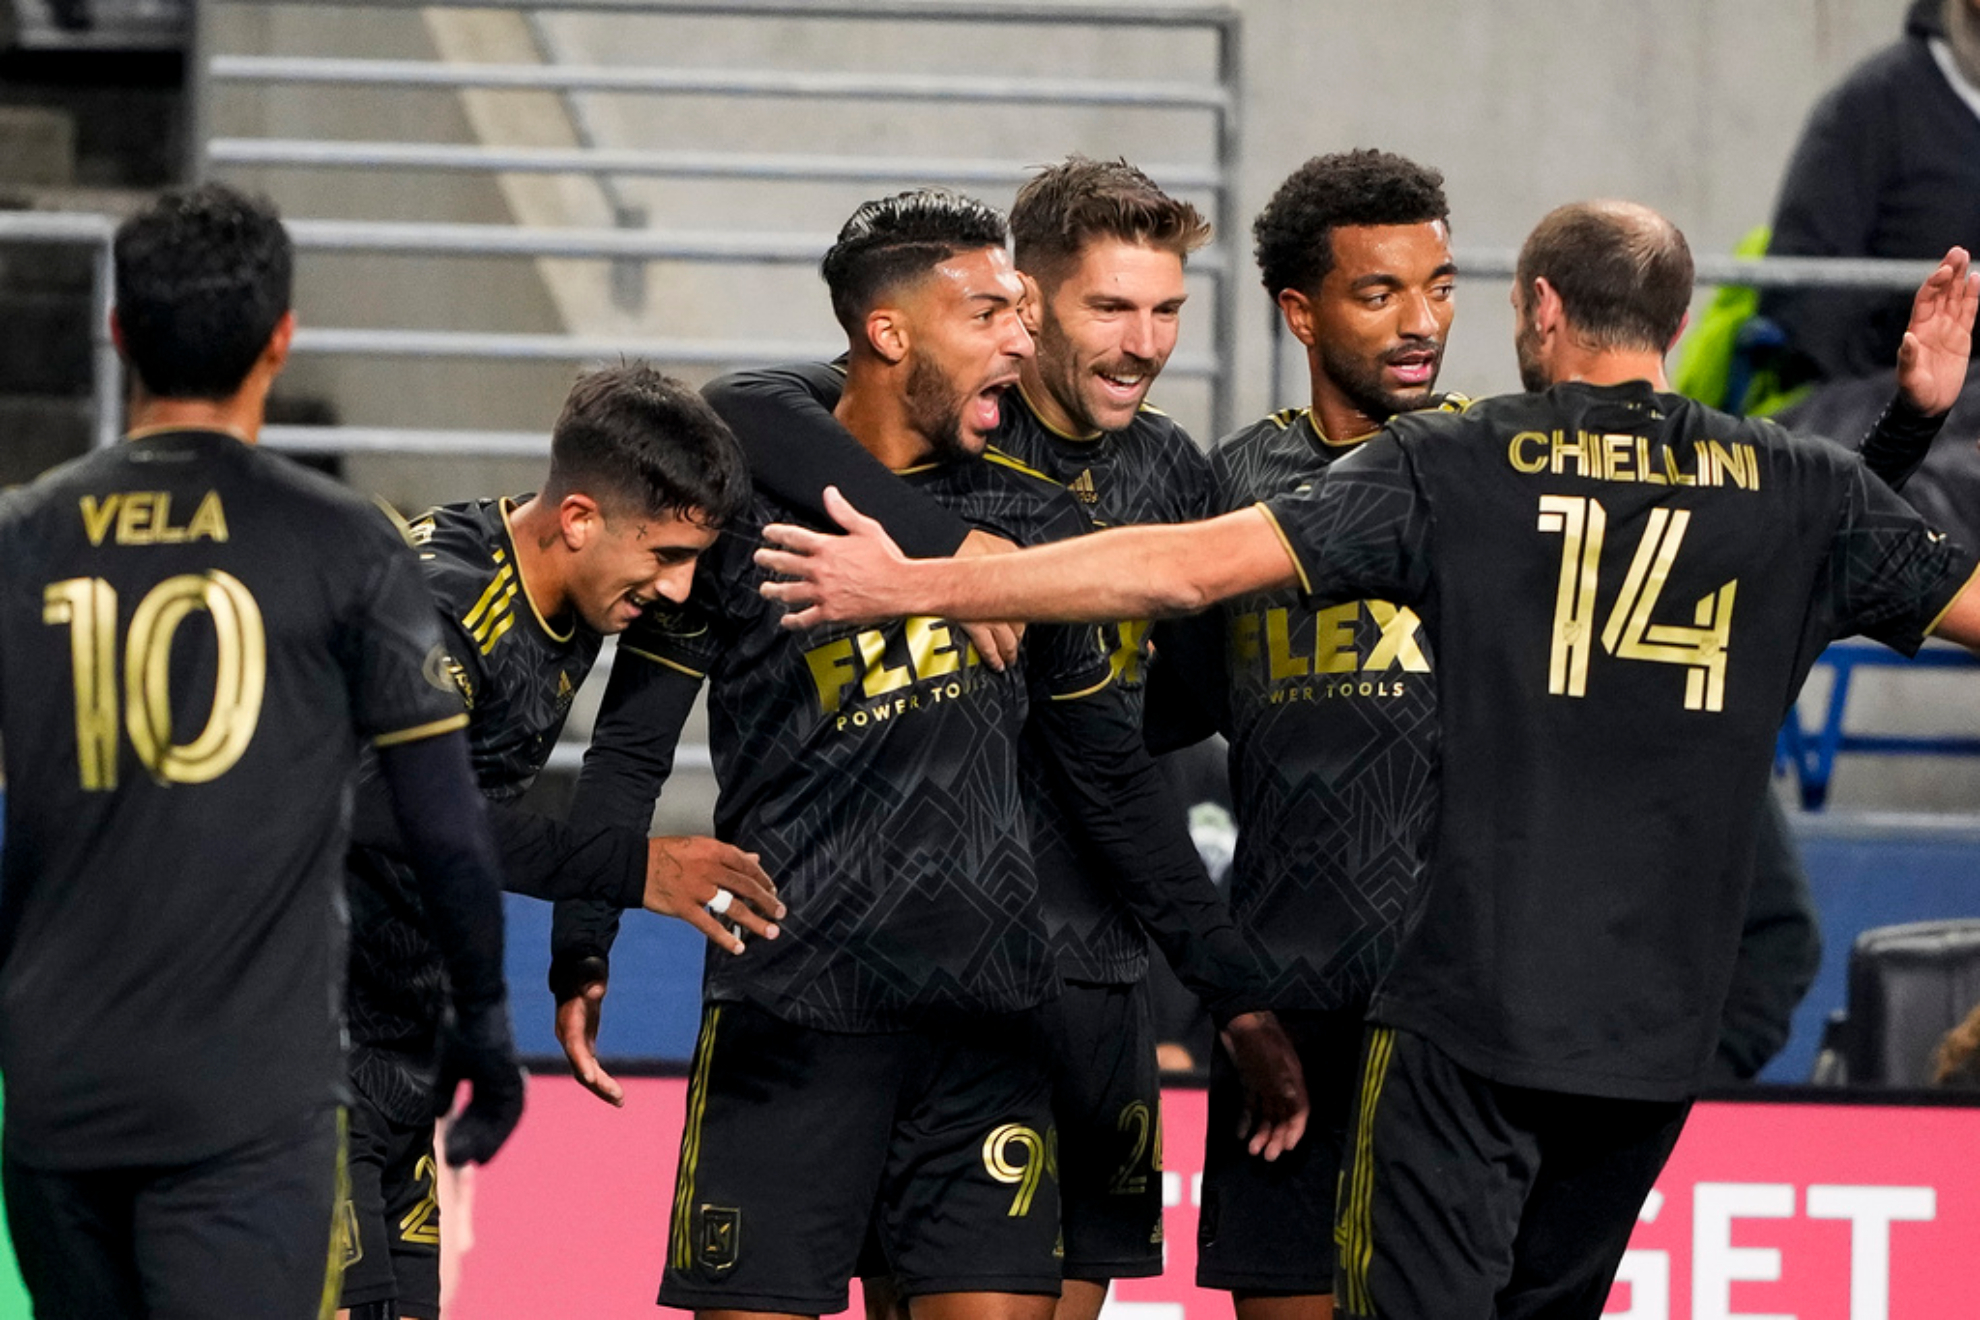 LAFC triumphs over Sounders, will defend the crown at Western Championship versus Dynamo